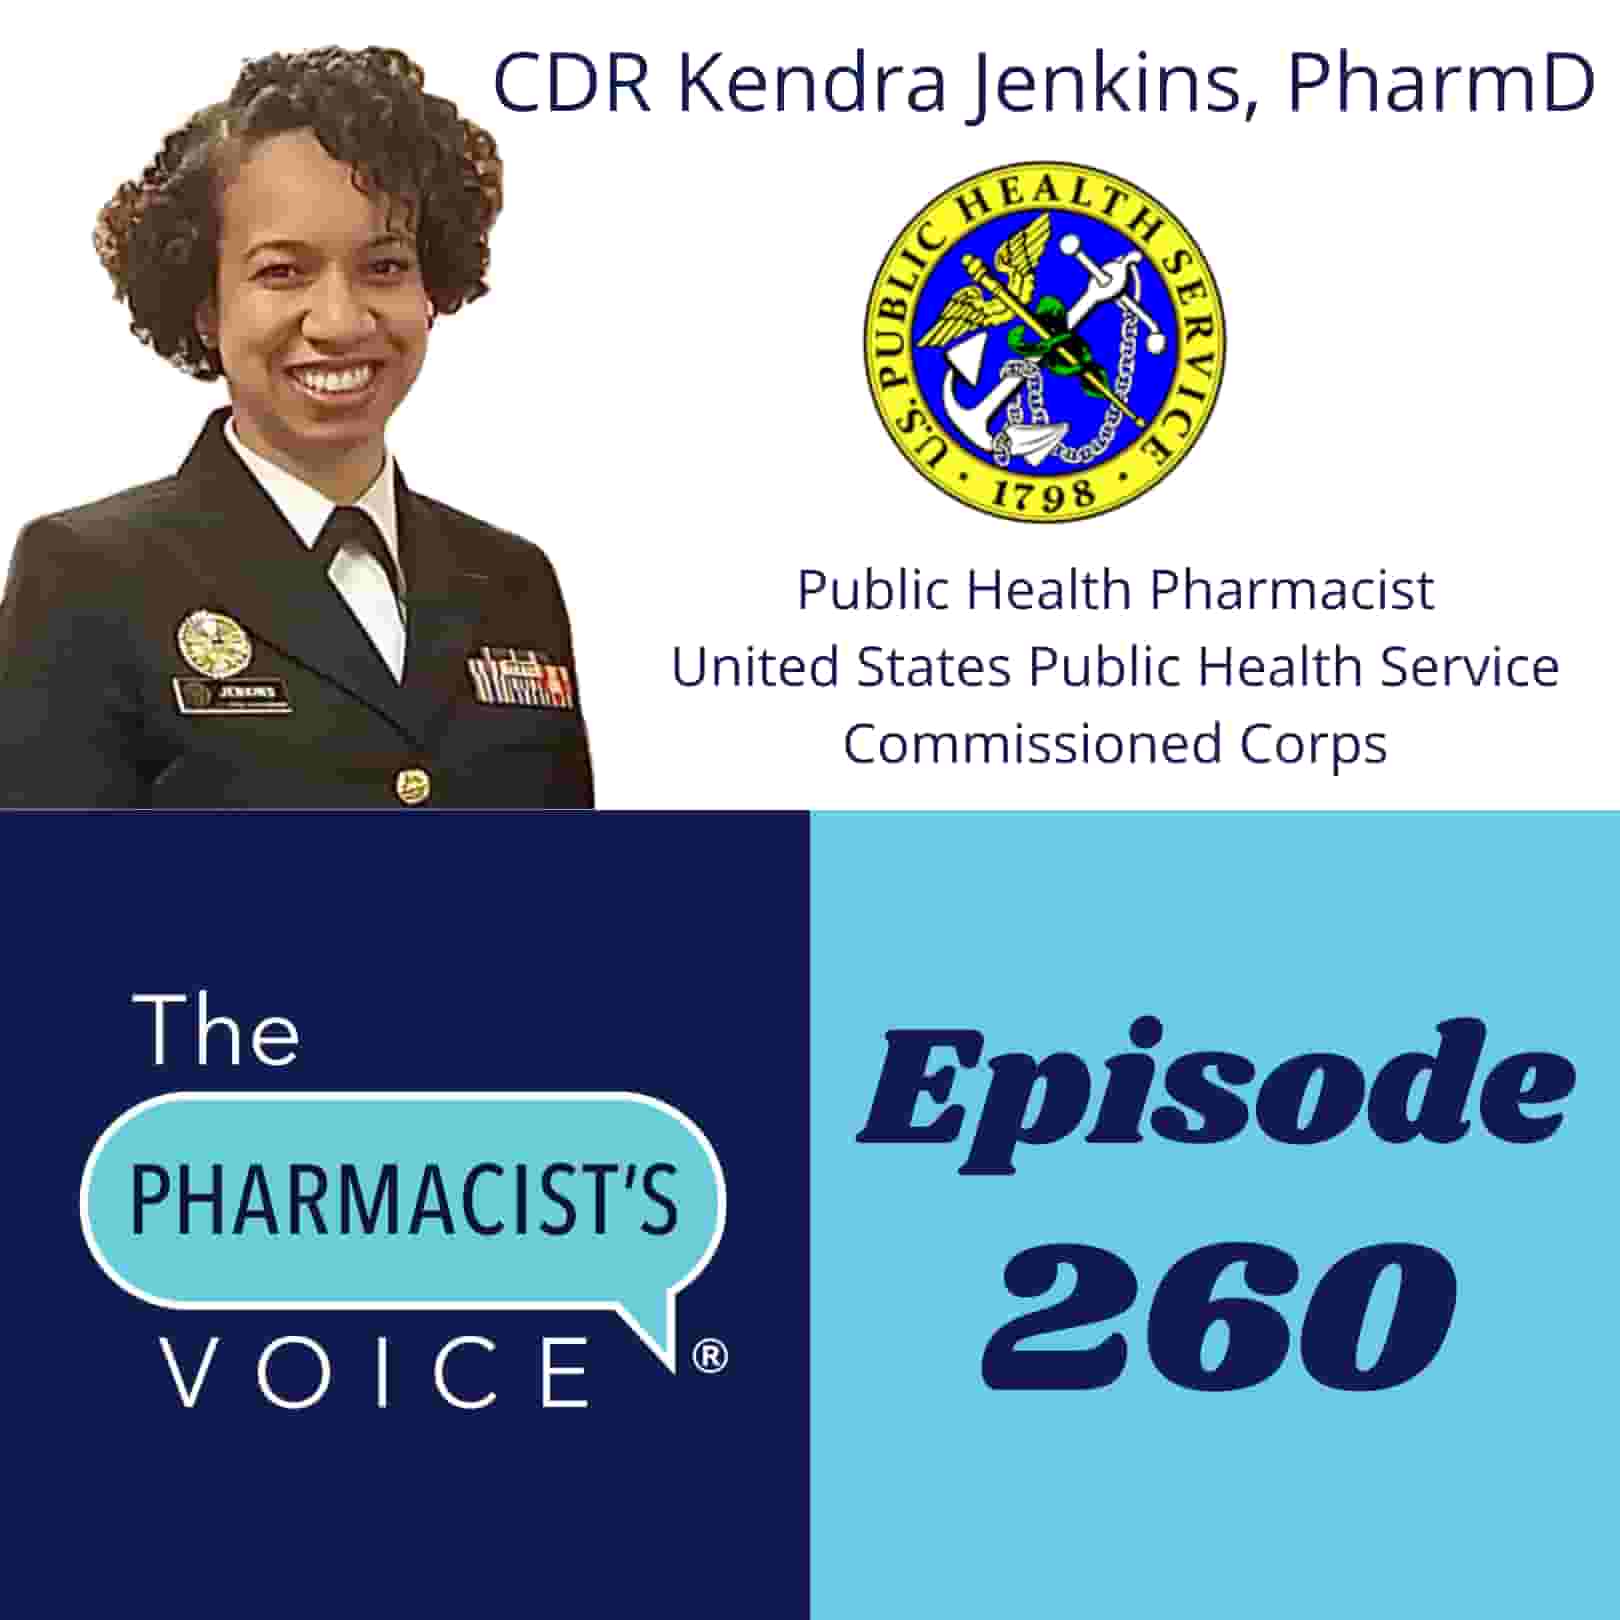 The Pharmacist's Voice Podcast Episode 260. Interview with CDR Kendra Jenkins, PharmD